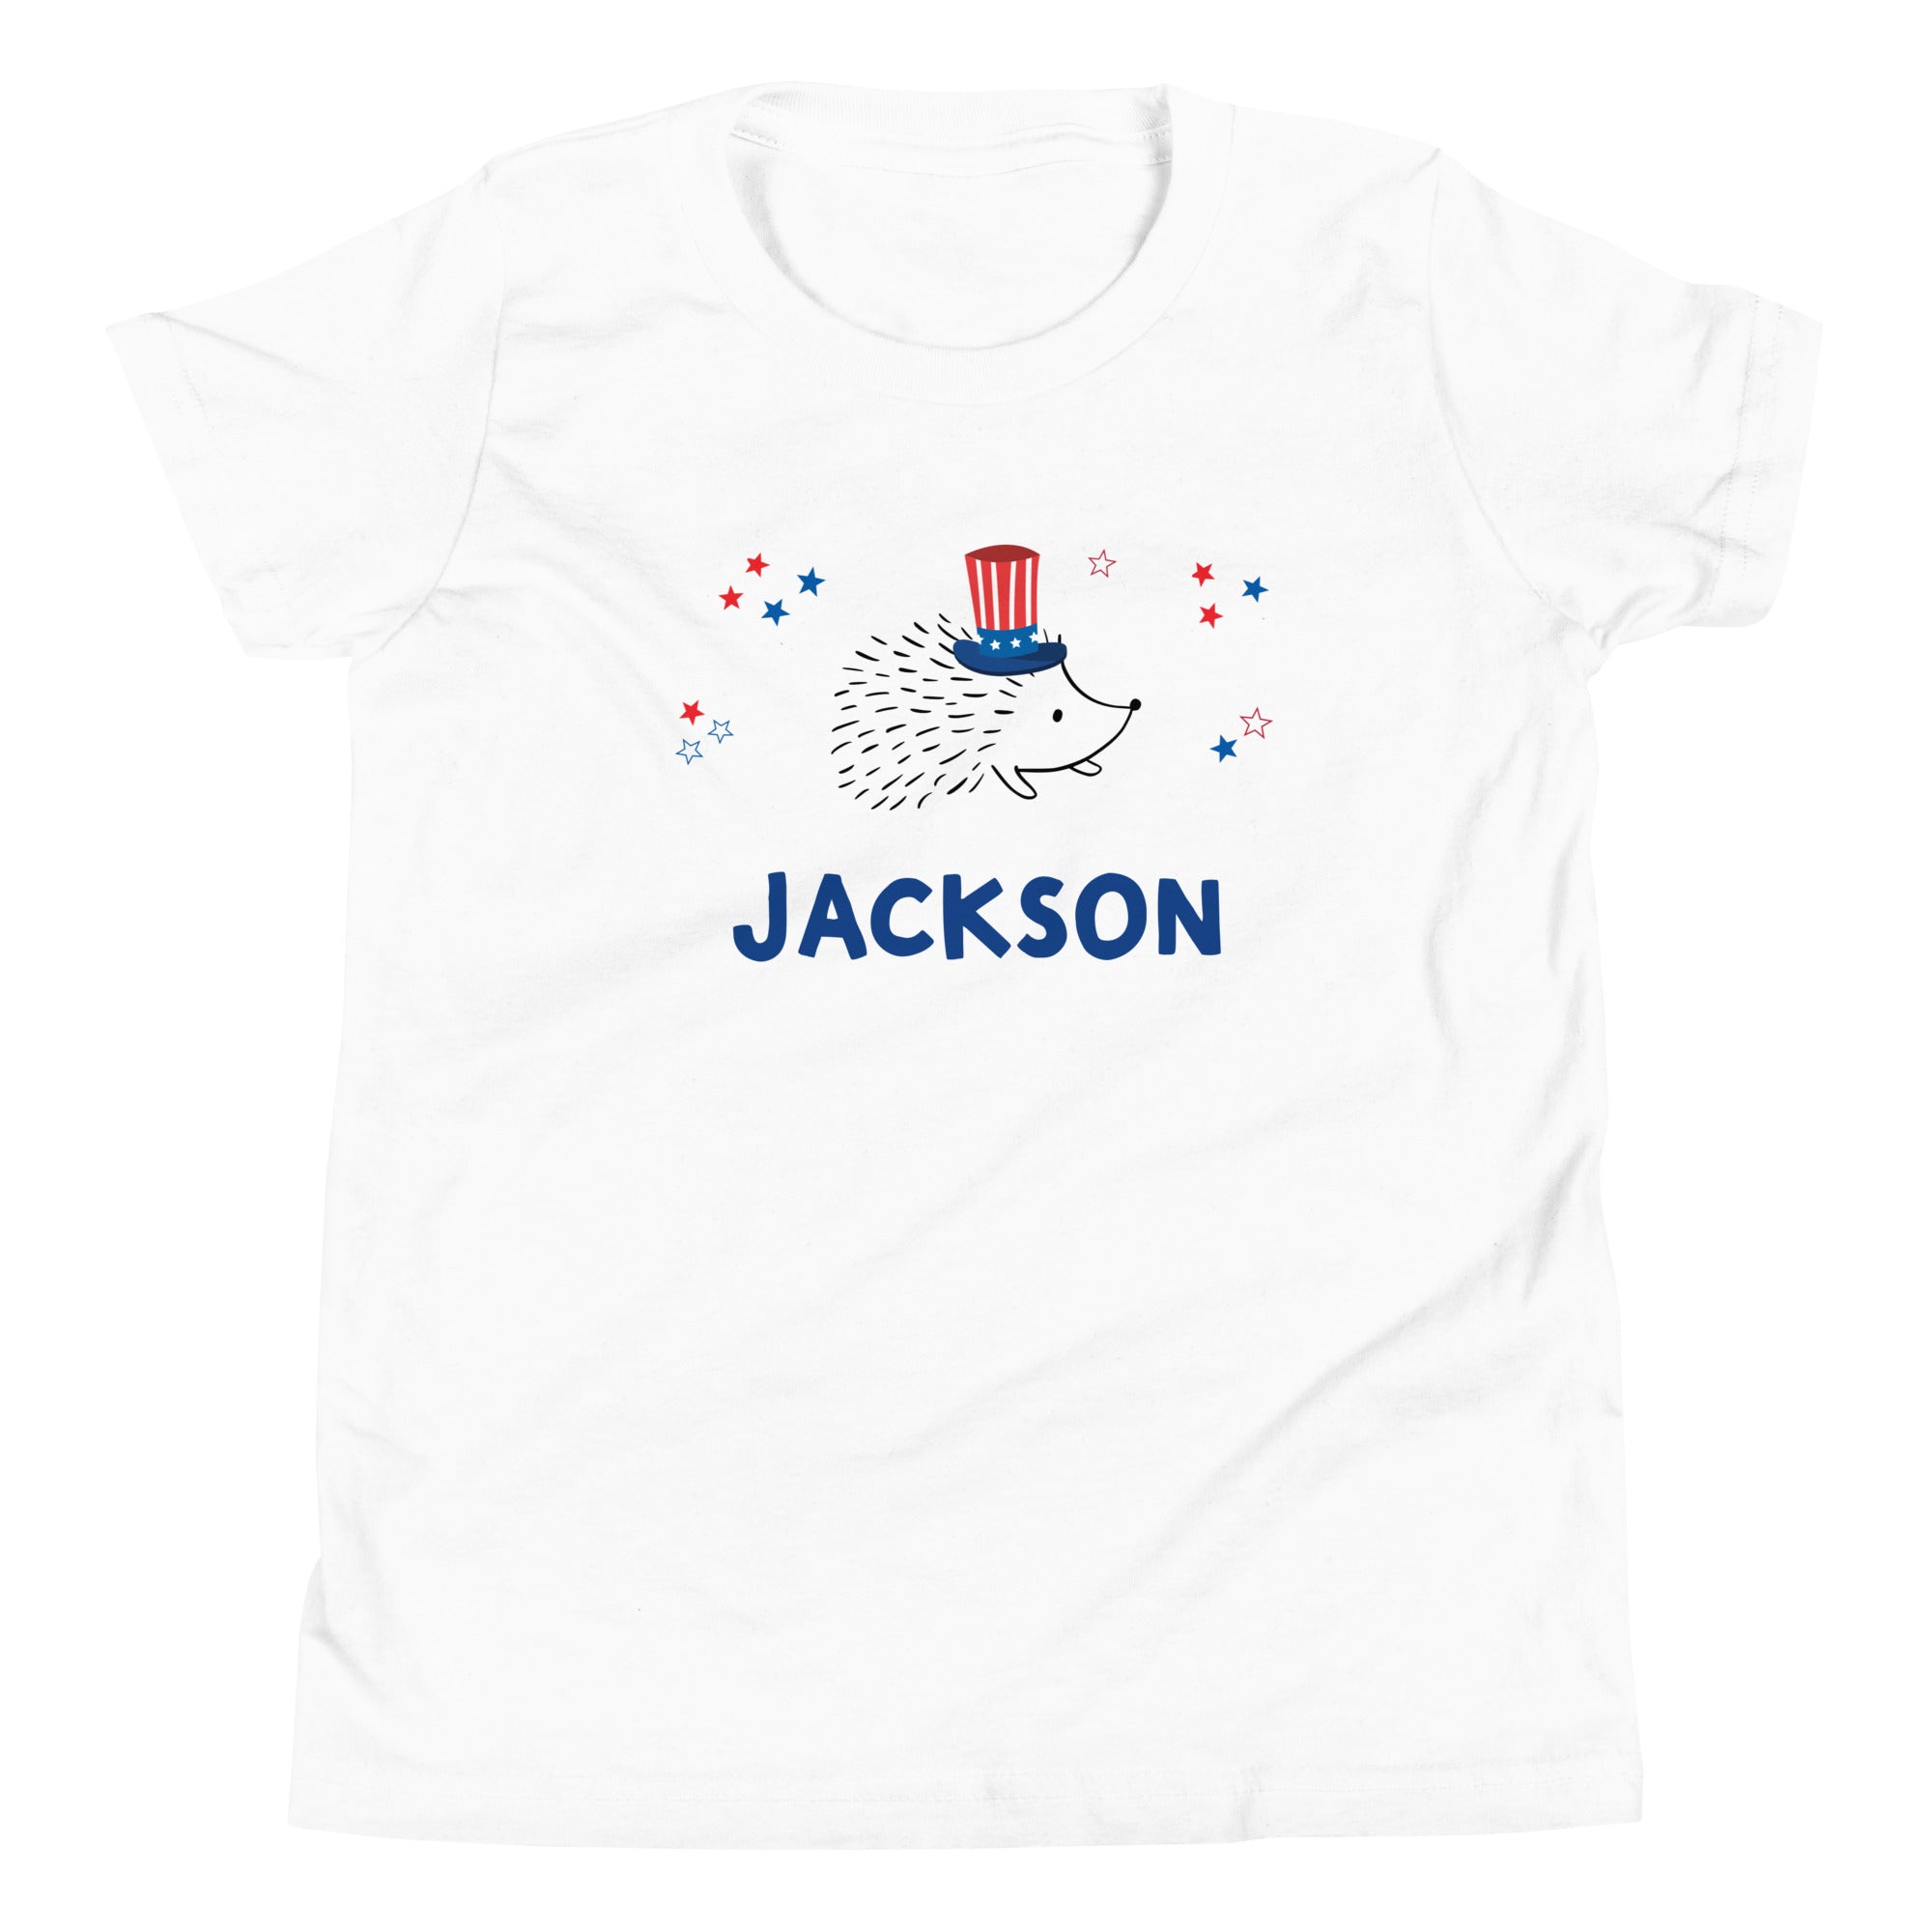 Kid's personalized shirt perfect for celebrating 4th of July